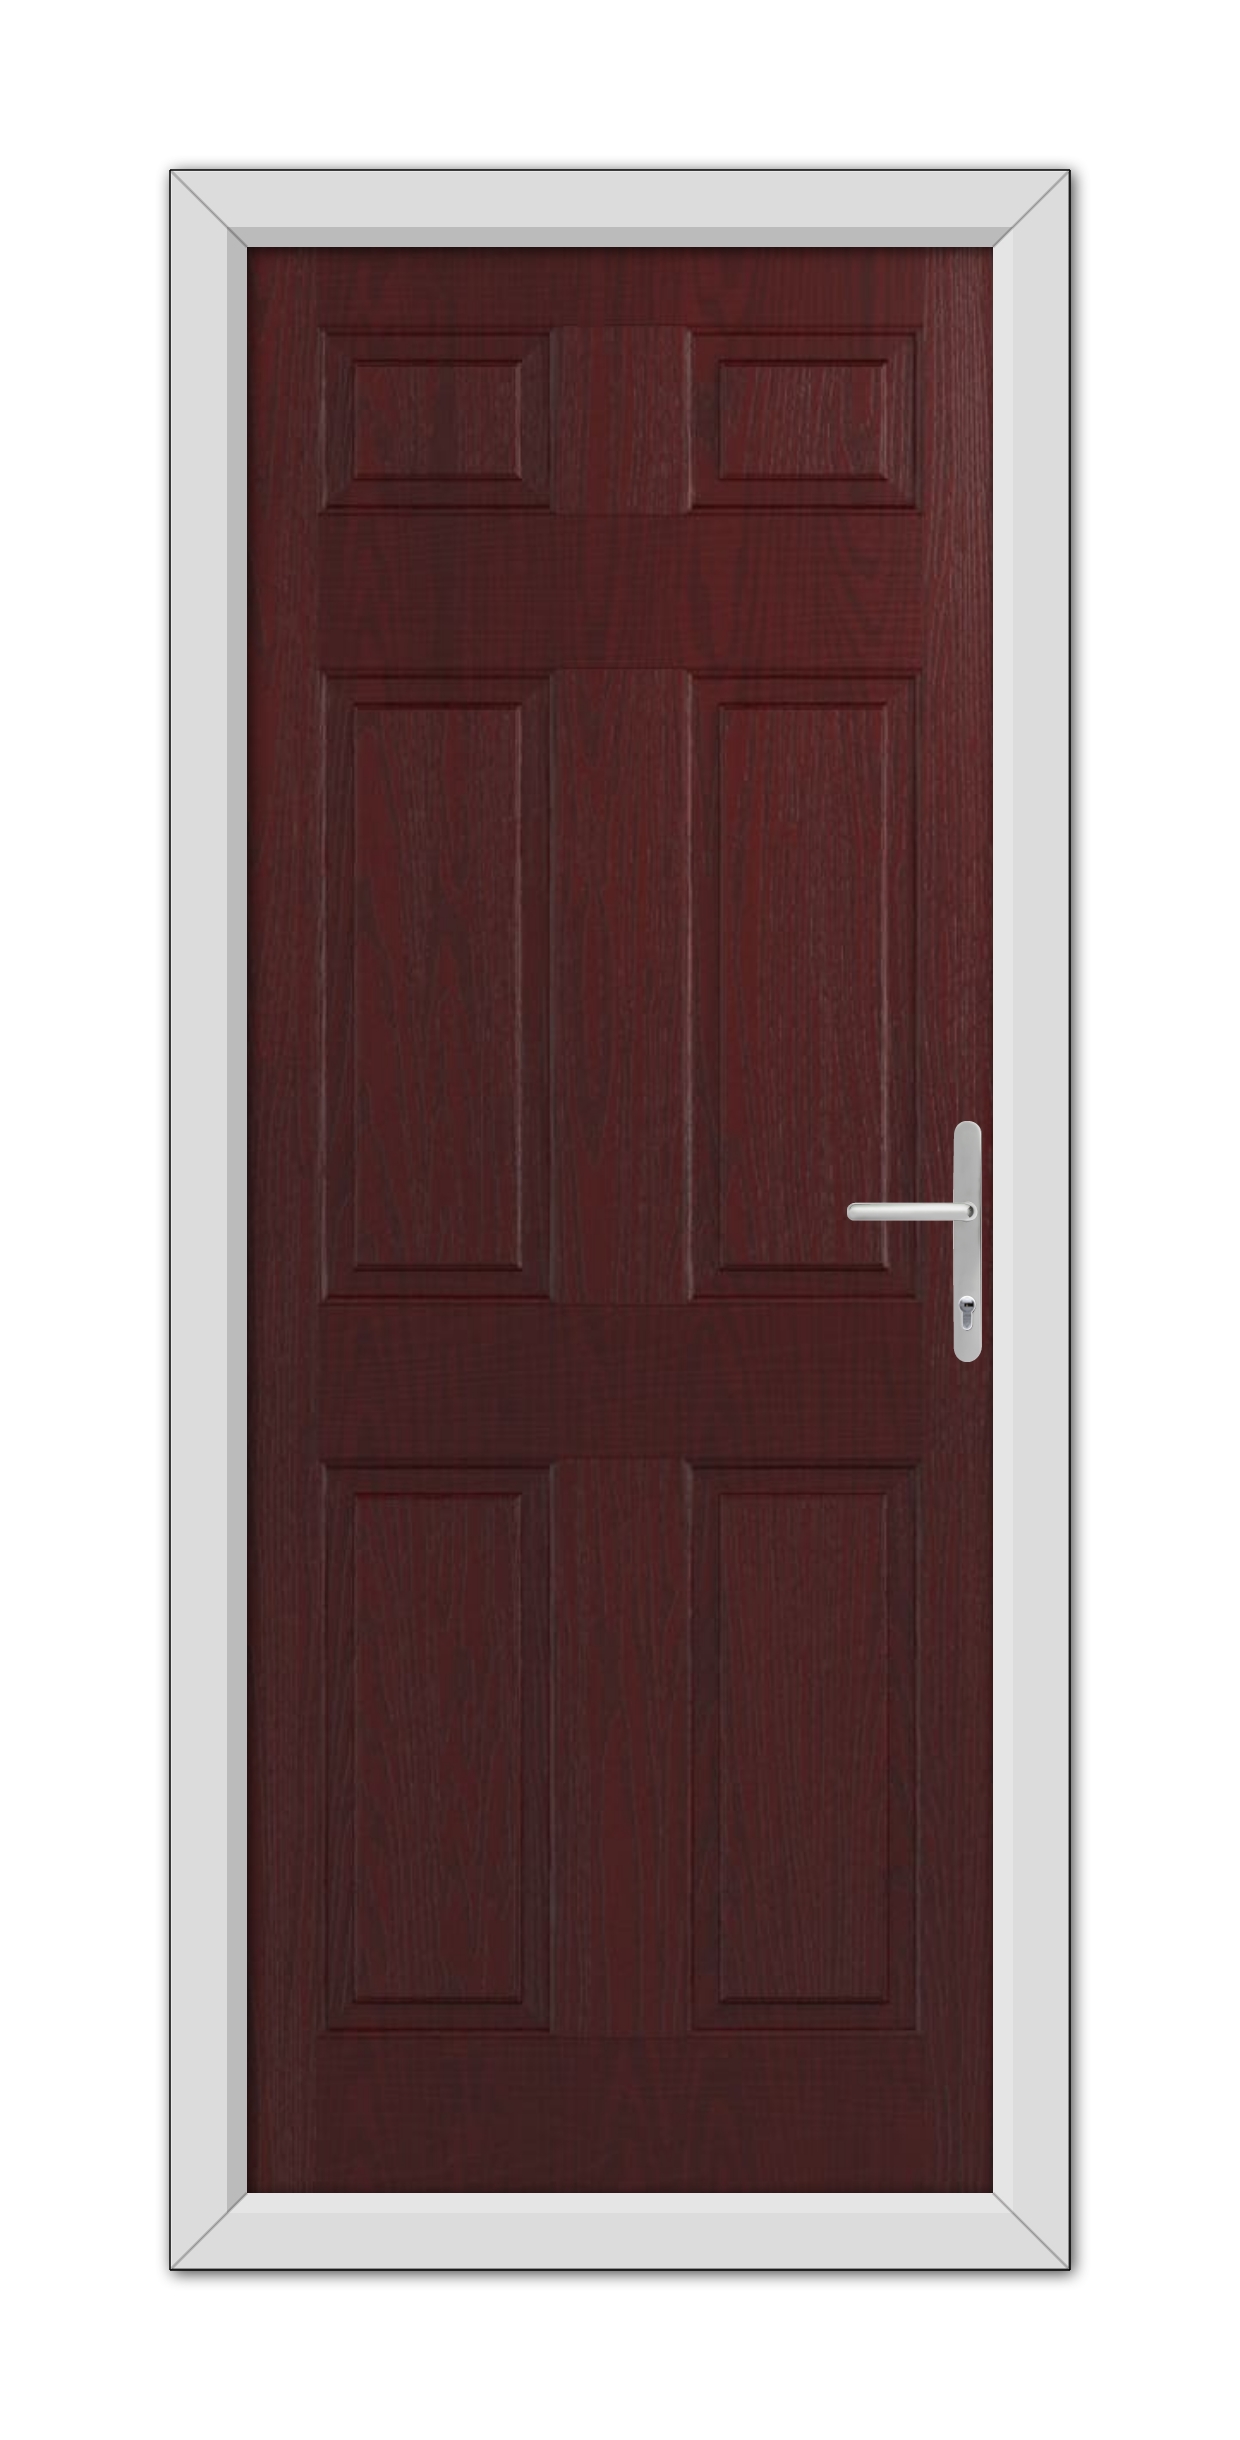 A closed, modern Rosewood Middleton Solid Composite door with a white frame and a metallic handle, set within a white wall.